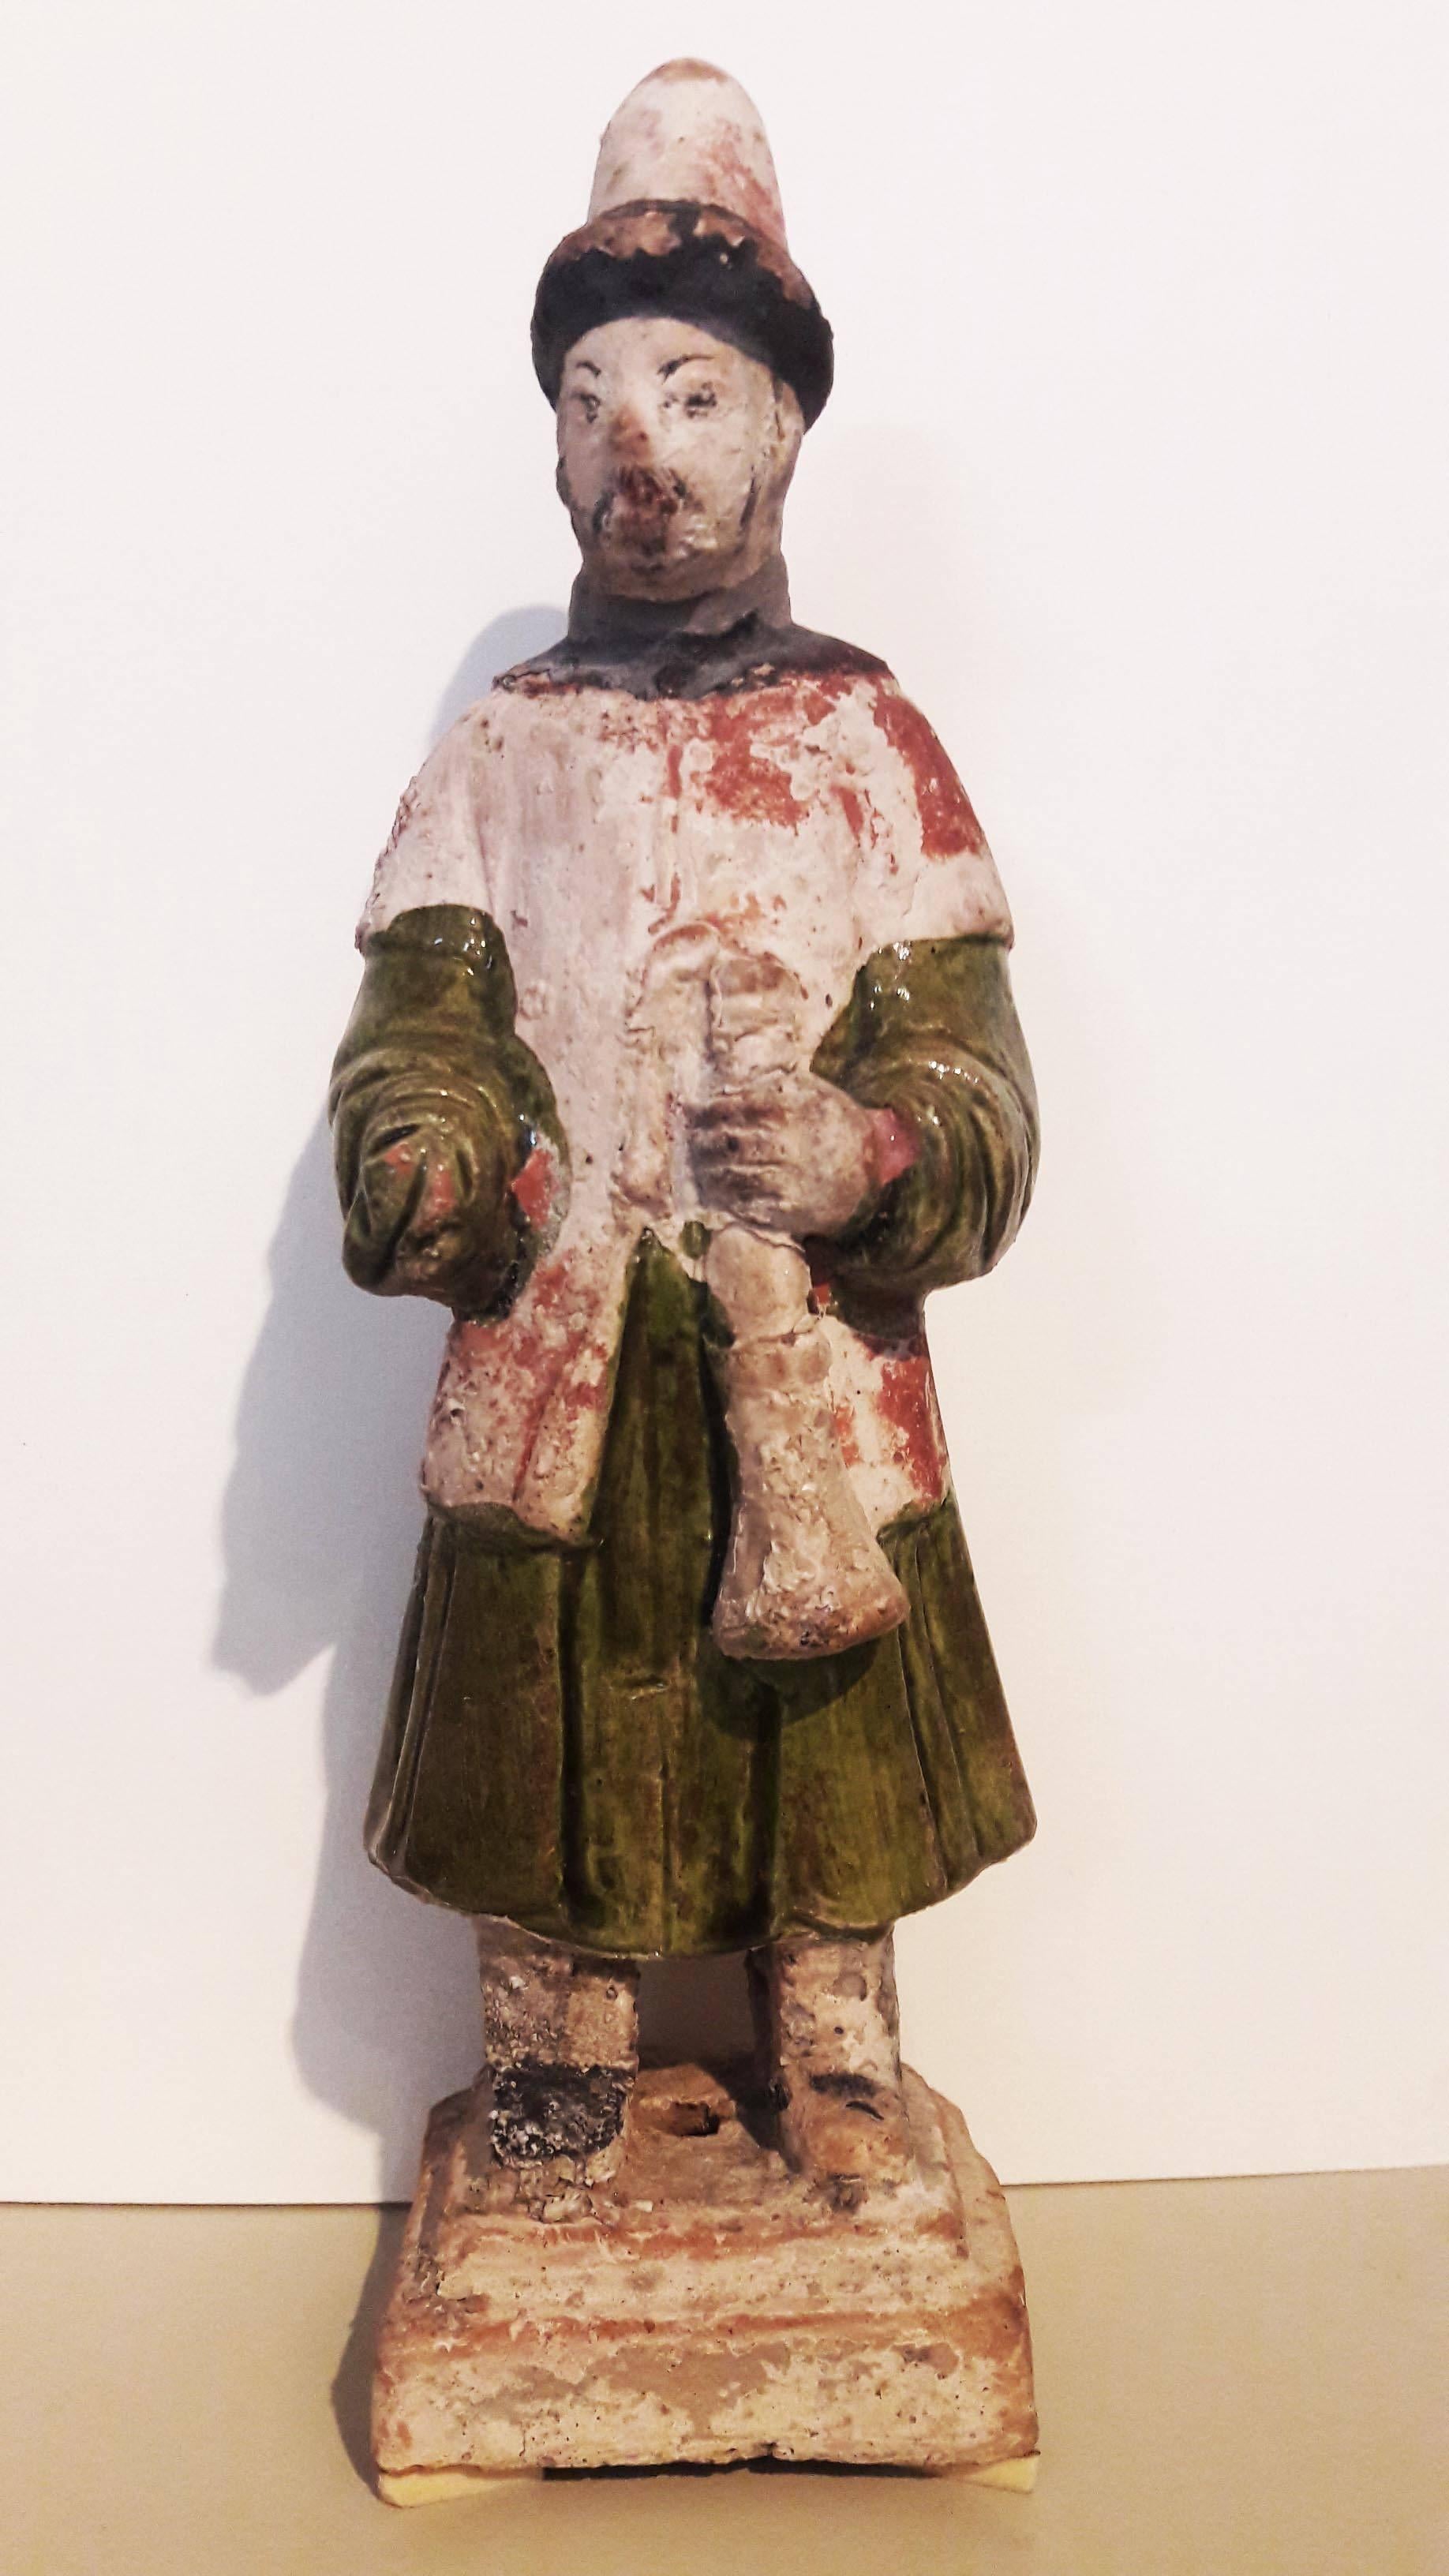 A ritual attendant figure, used in funerary ceremonies during the Ming dynasty period (1368-1644). Glazed terracotta.